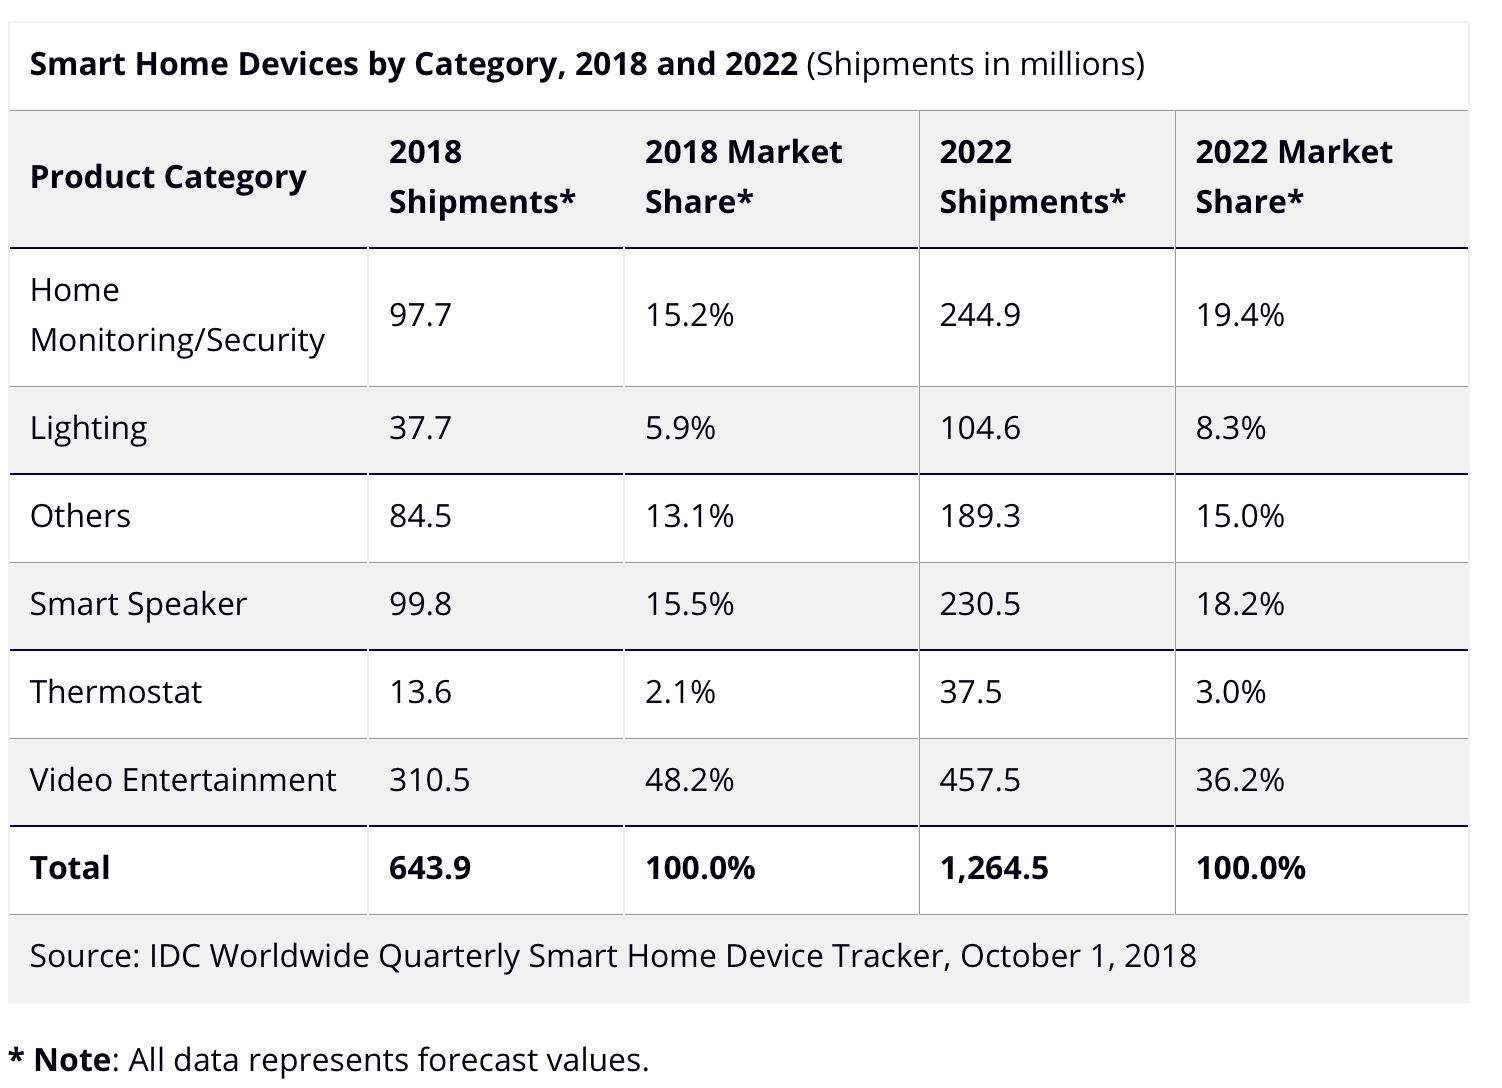 All categories of smart home devices to deliver double-digit growth through 2022